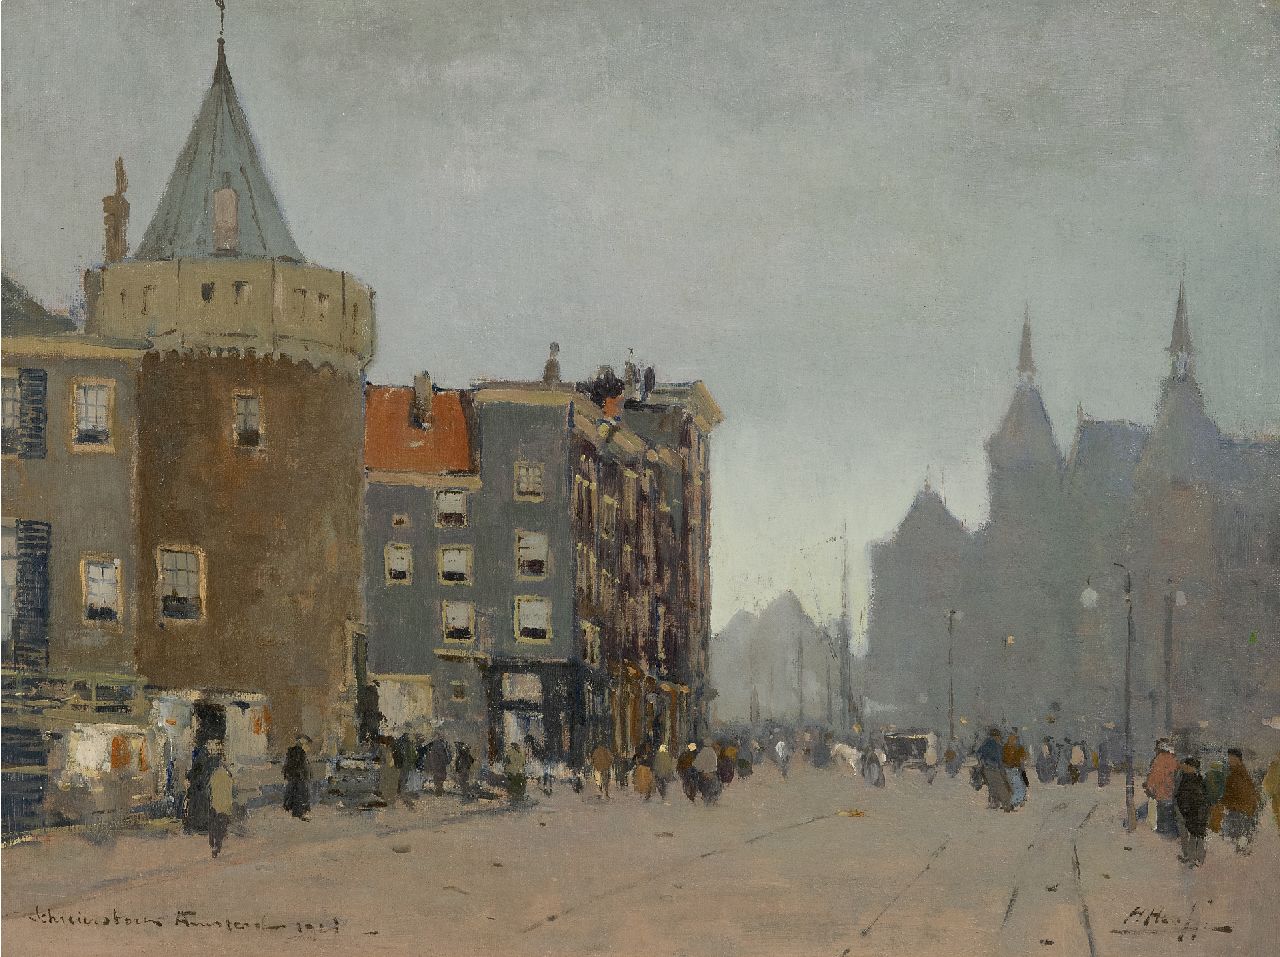 Heuff H.D.  | 'Herman' Davinus Heuff | Paintings offered for sale | The Prins Hendrikkade with the Scheierstoren, Amsterdam, oil on canvas laid down on board 35.1 x 47.1 cm, signed l.r. and dated 1923